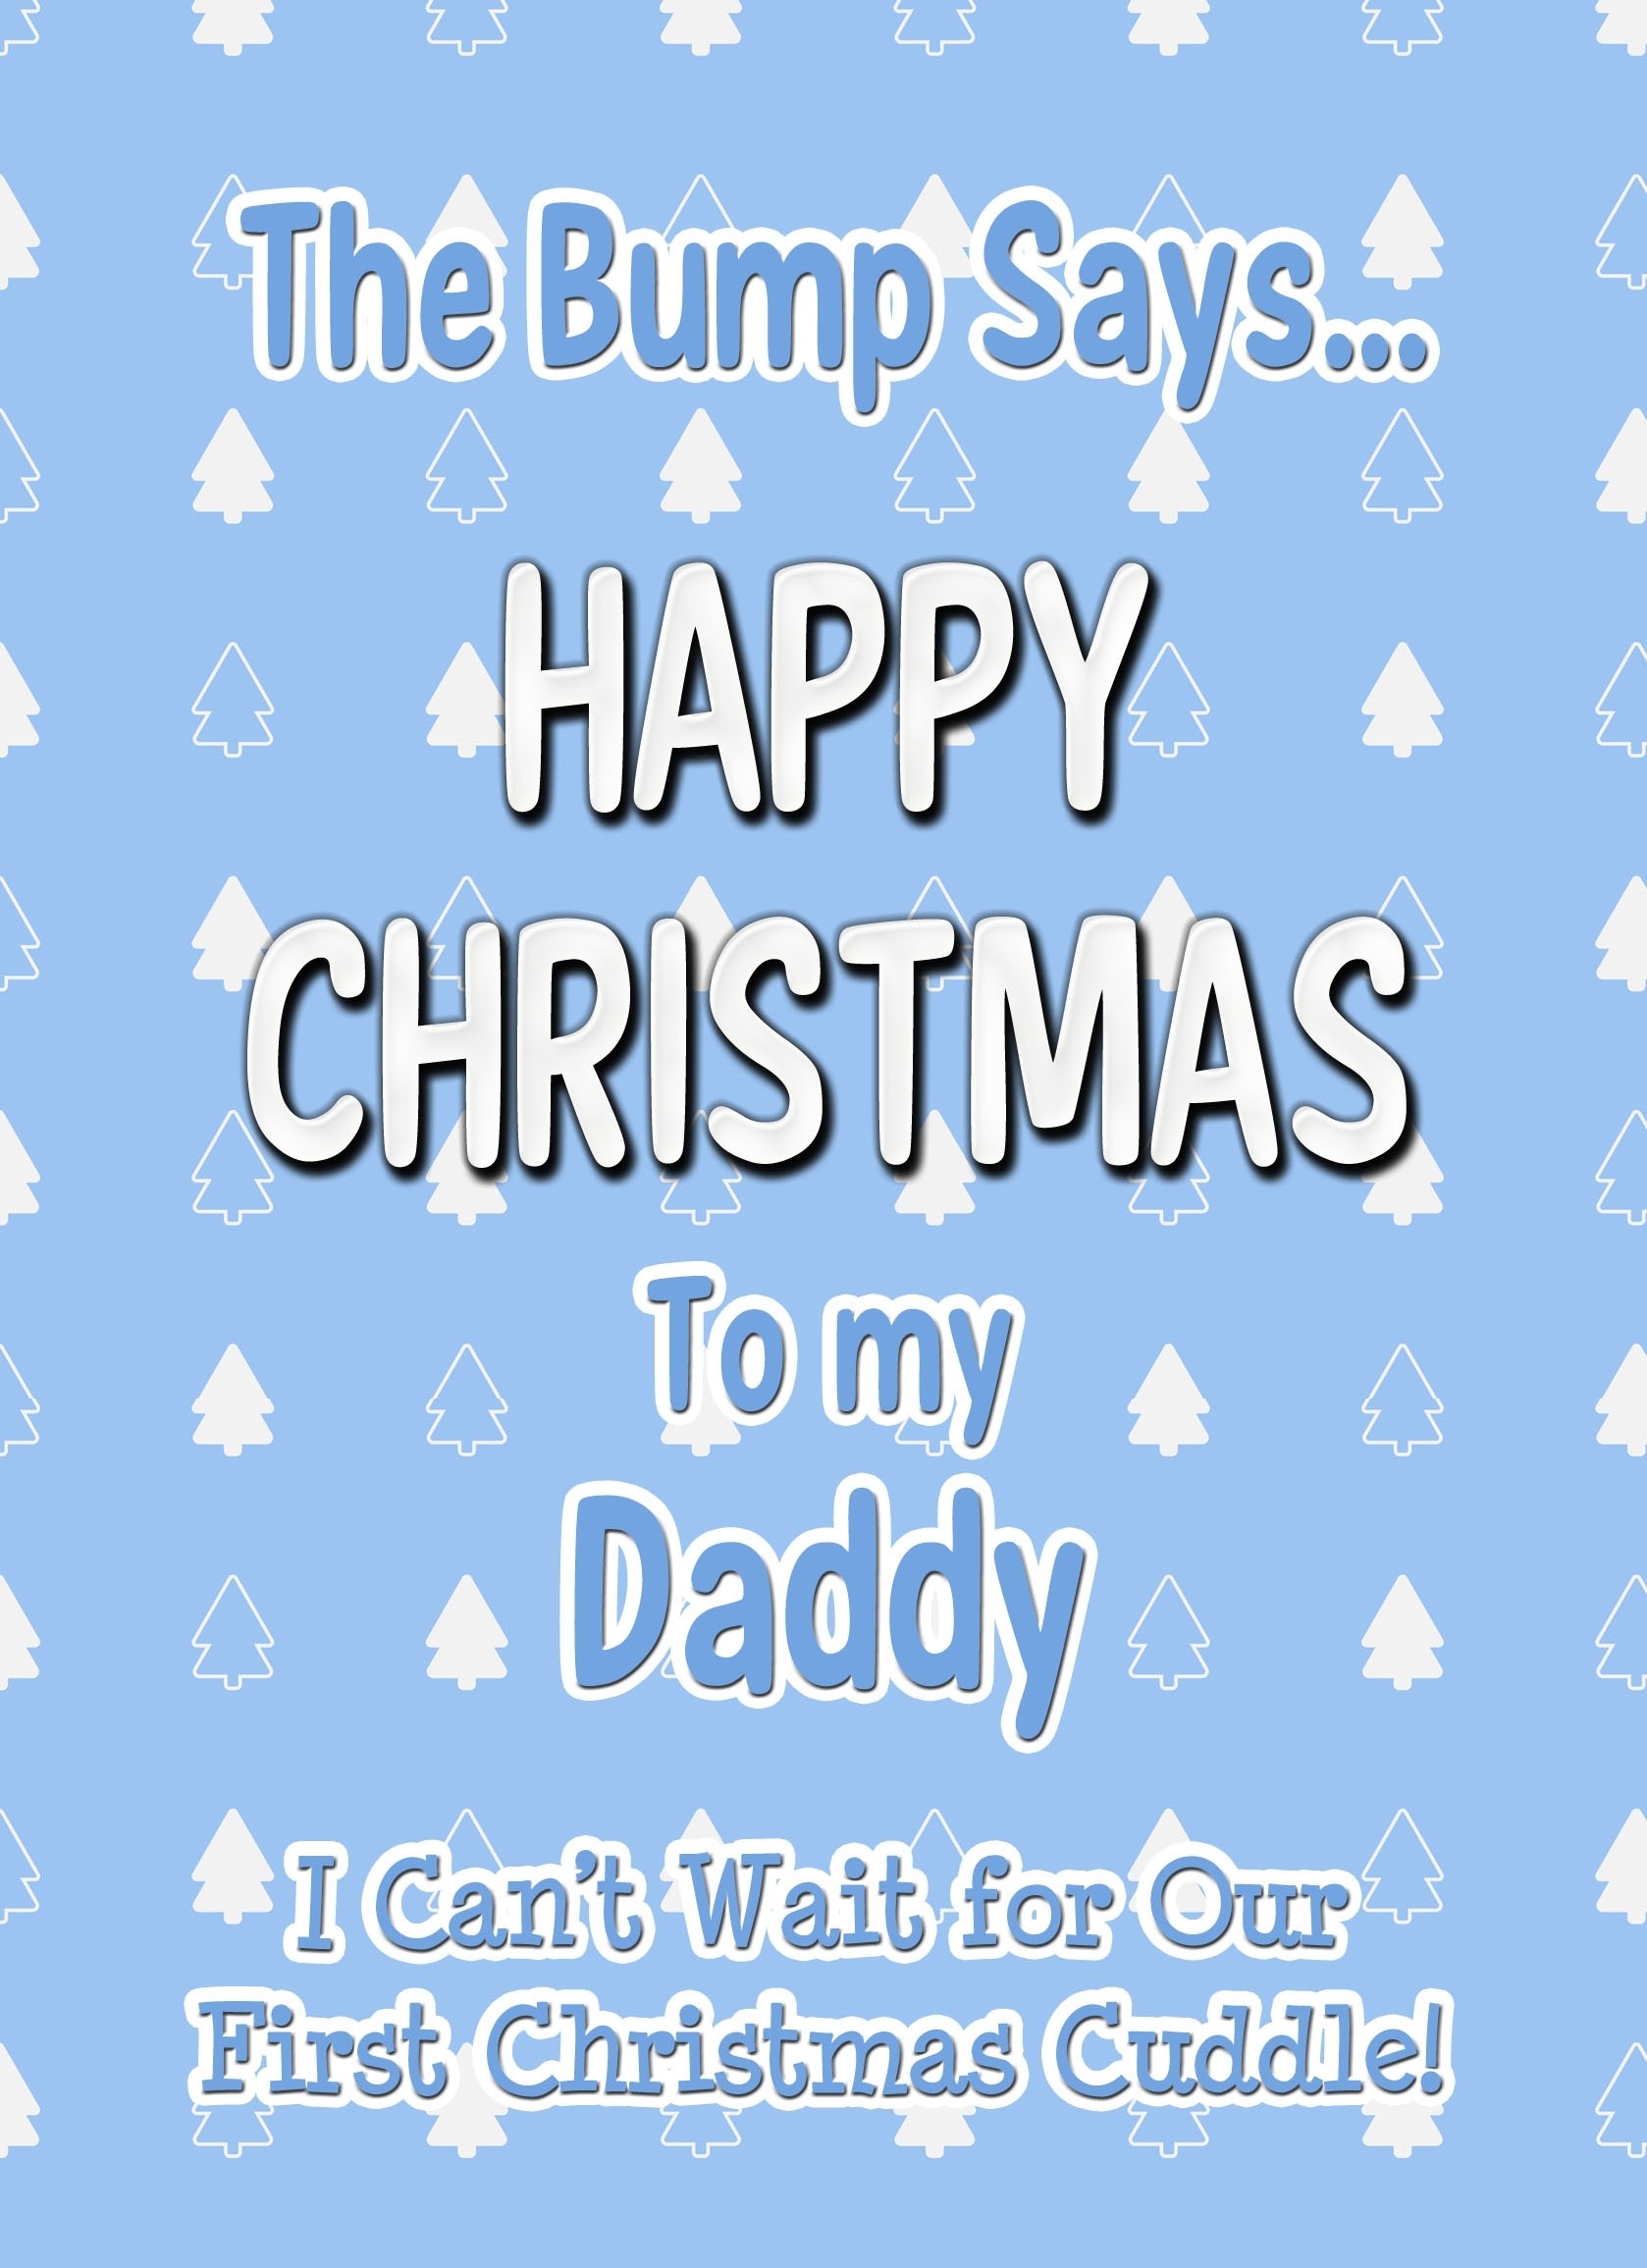 From The Bump Pregnancy Christmas Card (Daddy, Blue)